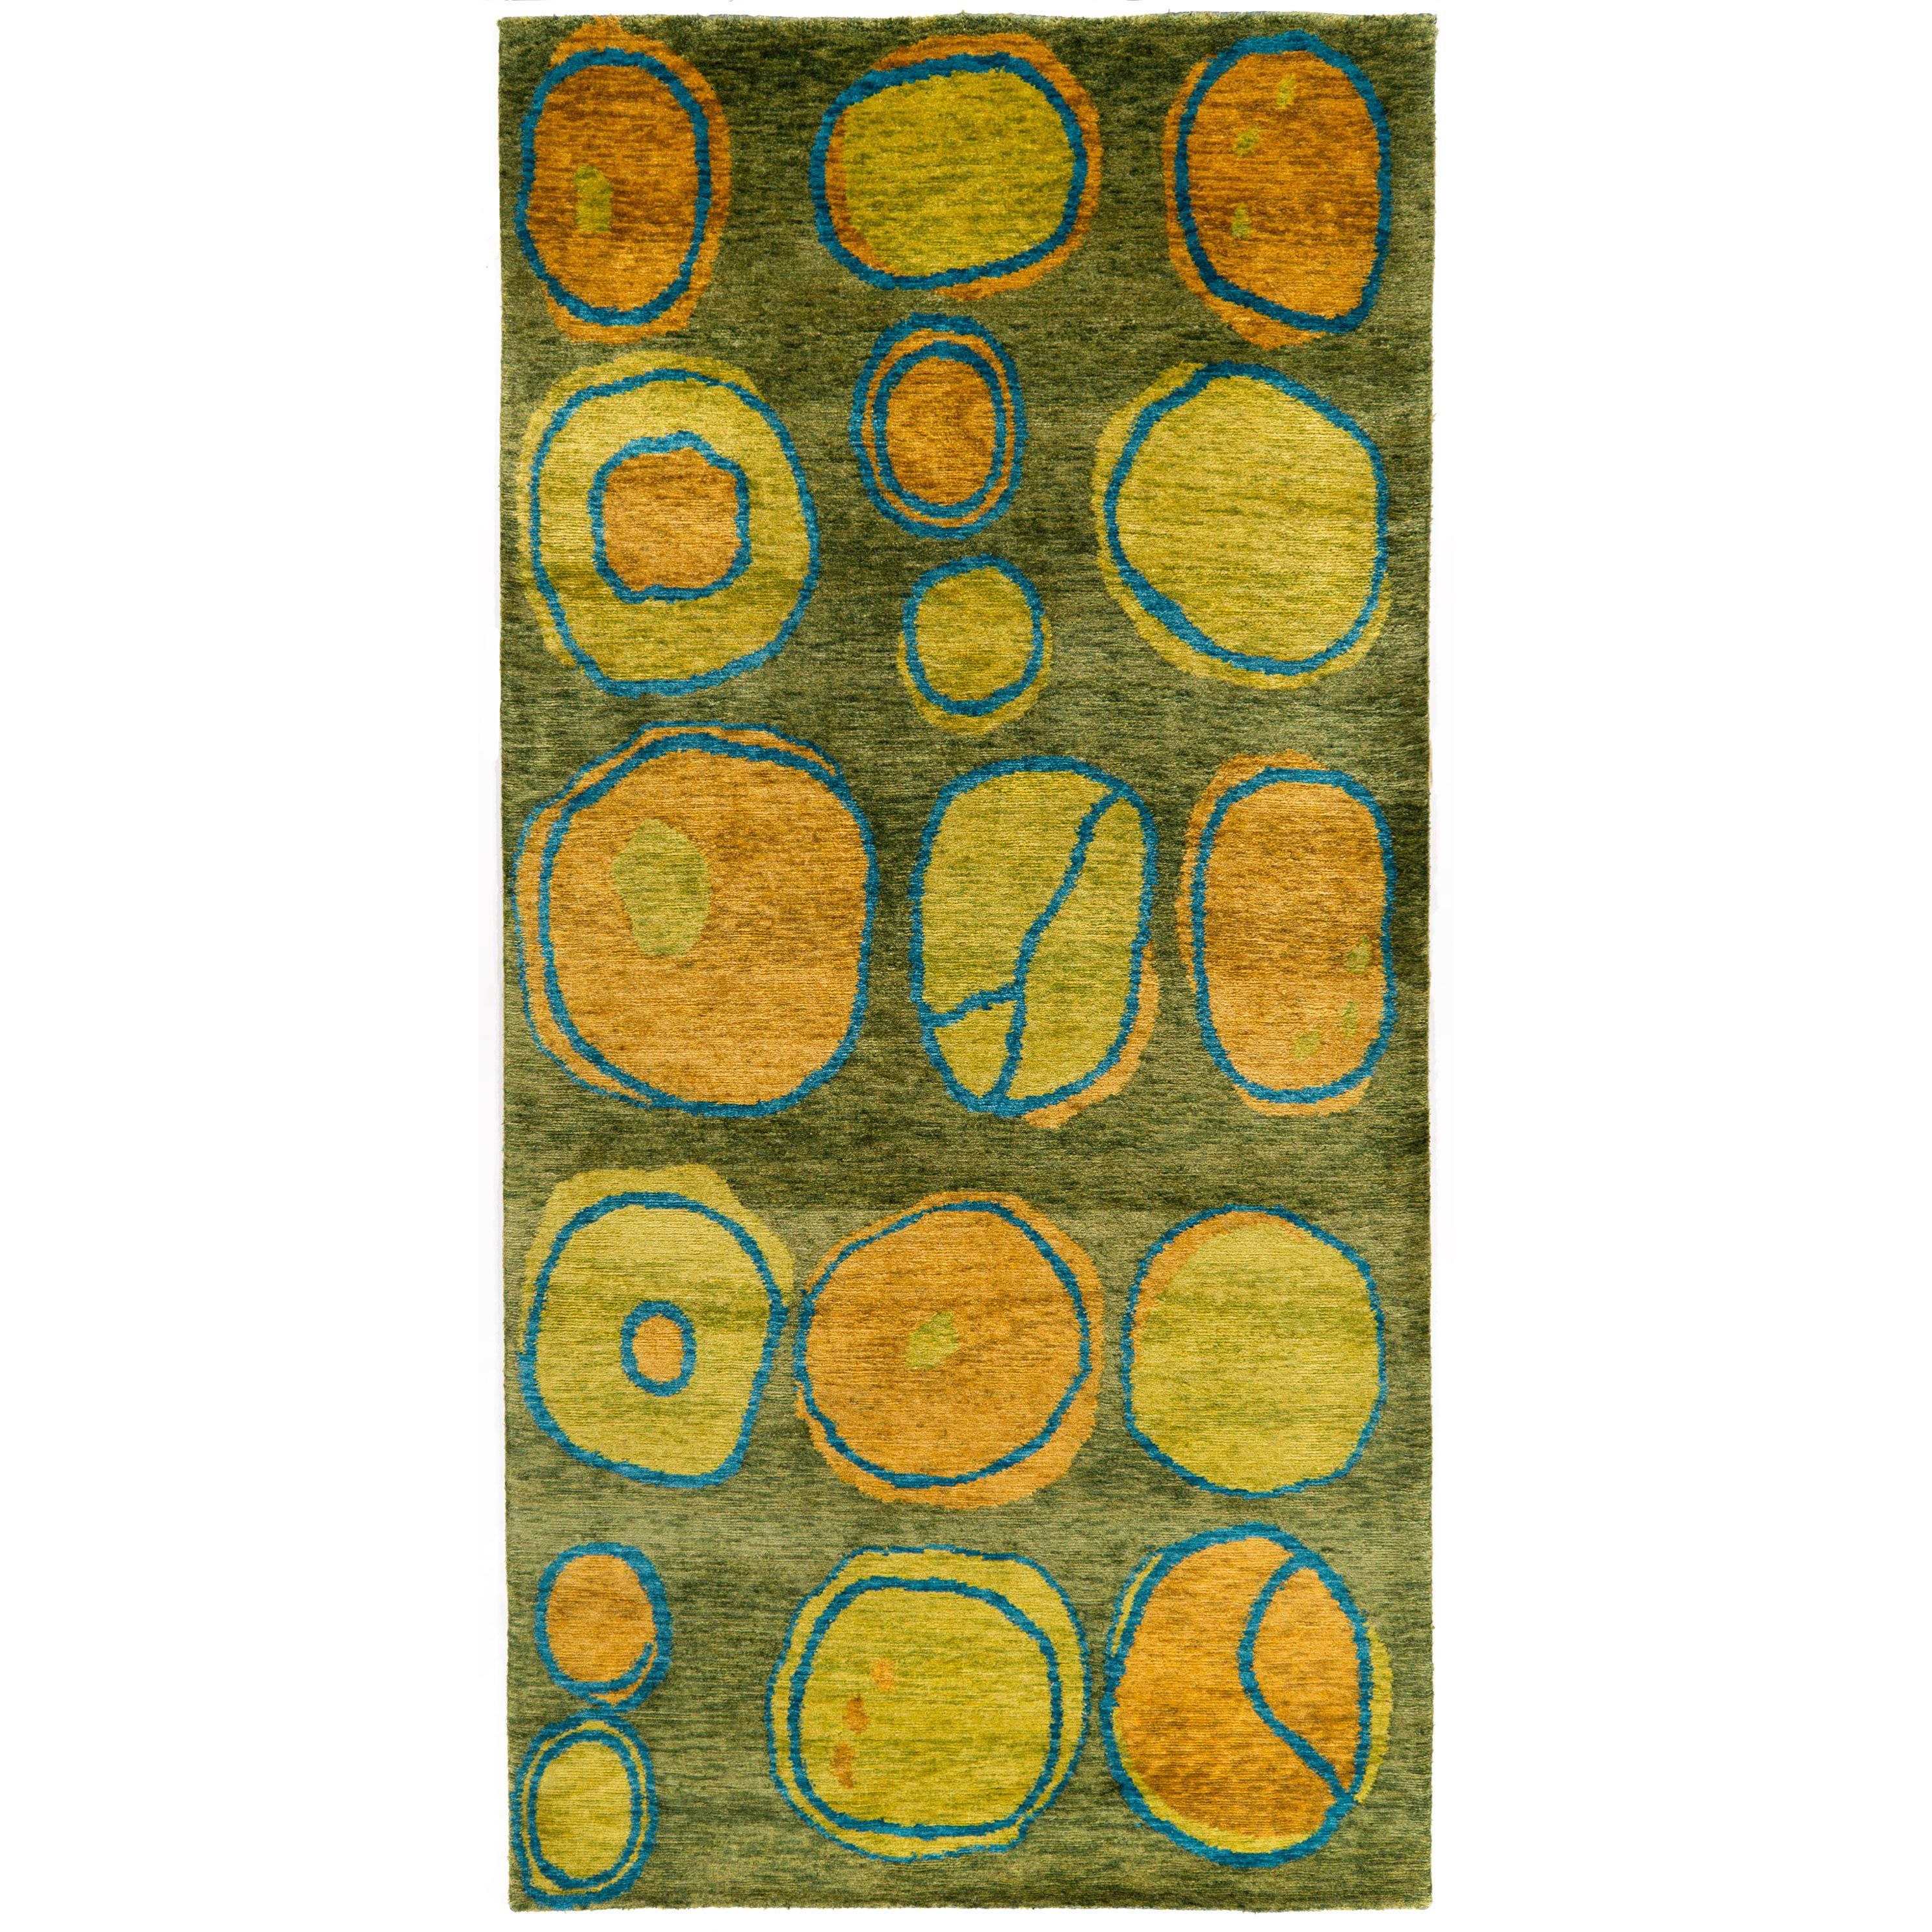 Wool And Silk Modernist Area Rug From Nepal 3x6